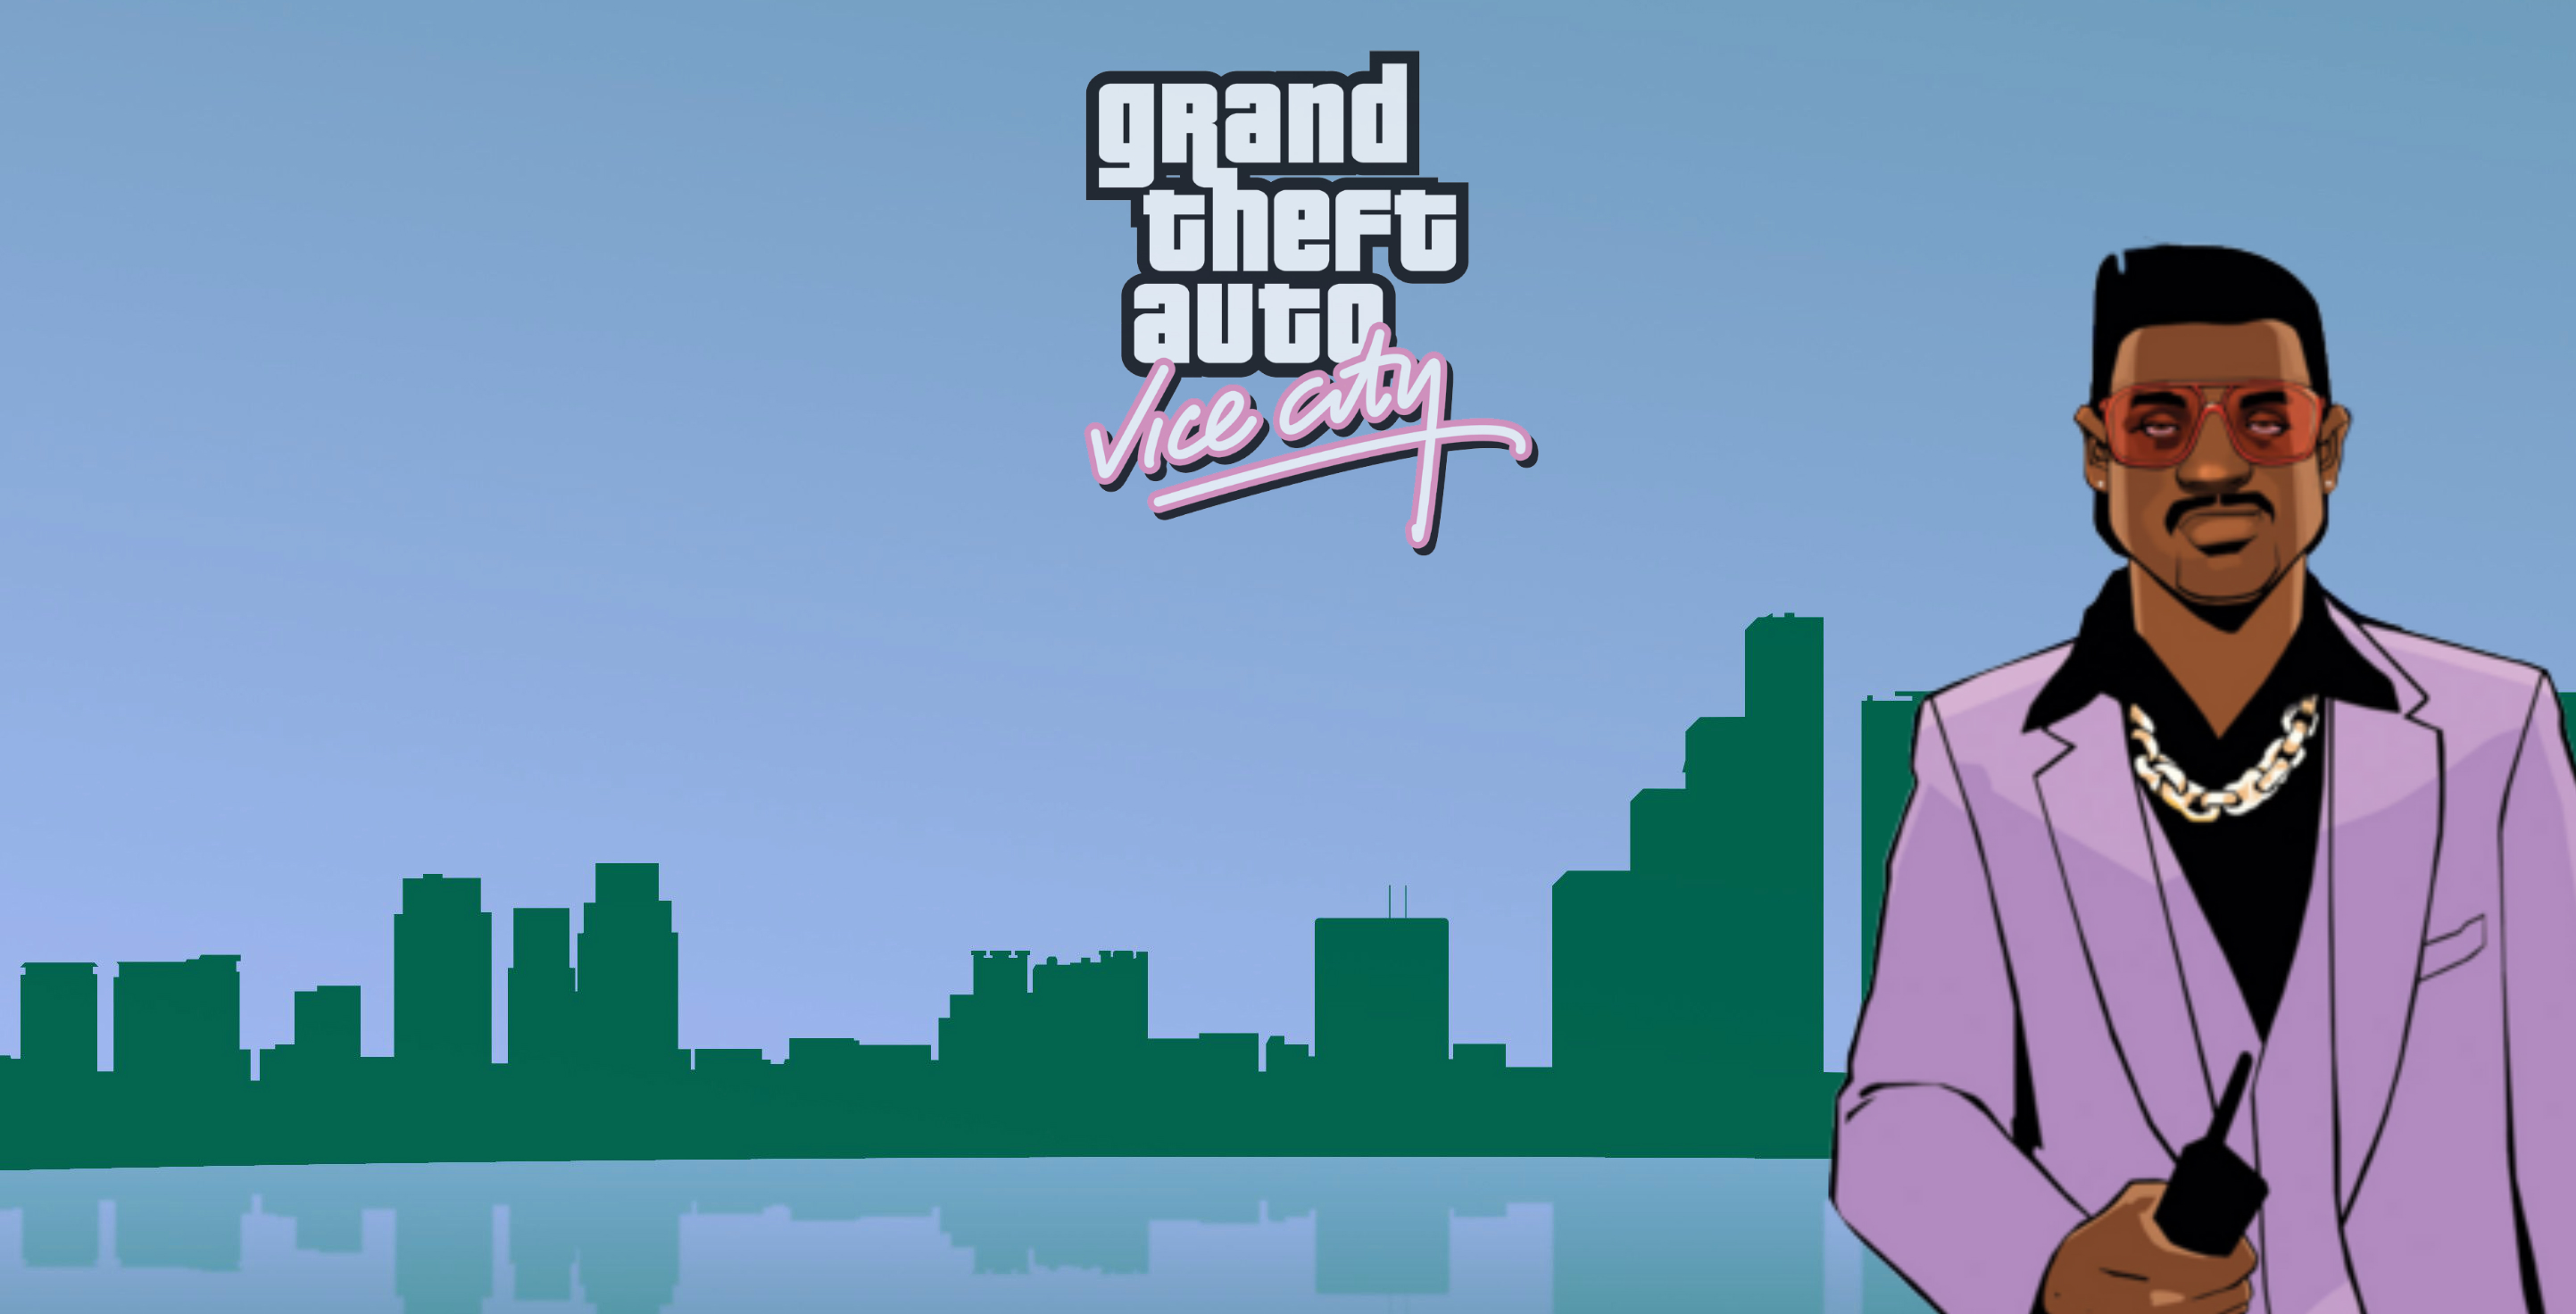 Grand Theft Auto: Vice City Picture by Amonzo2x1